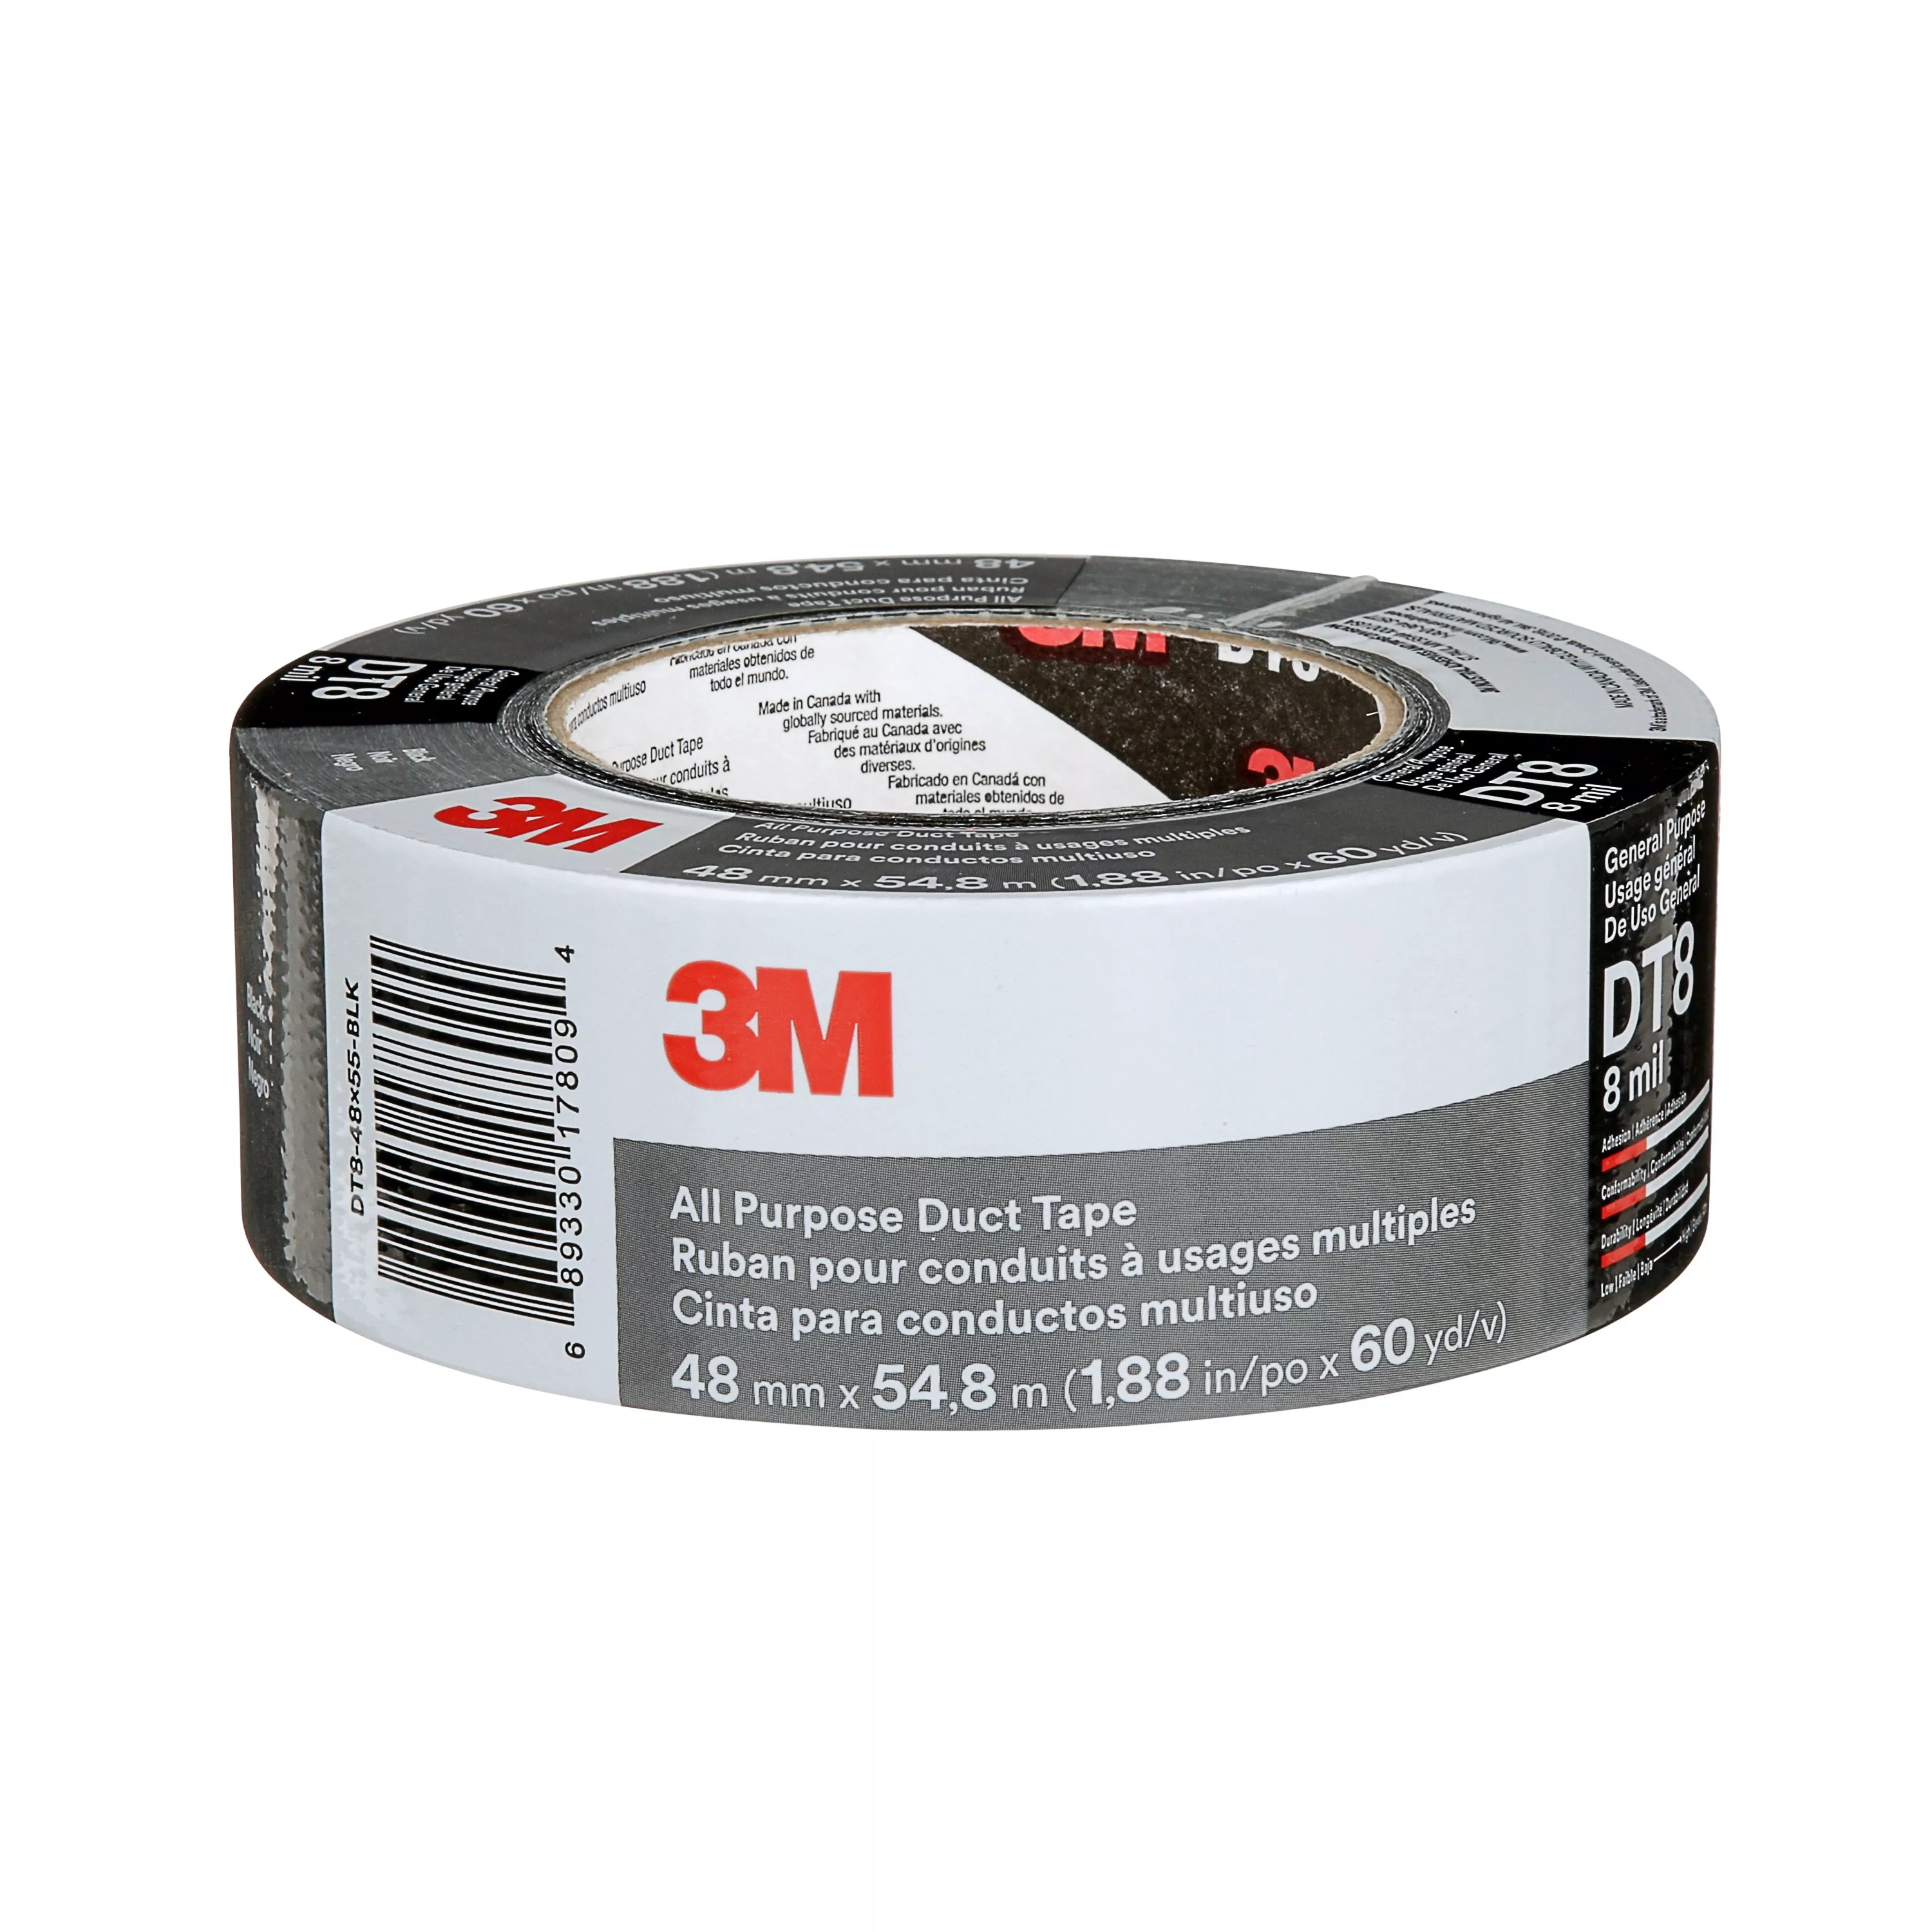 SKU 7100174104 | 3M™ All Purpose Duct Tape DT8